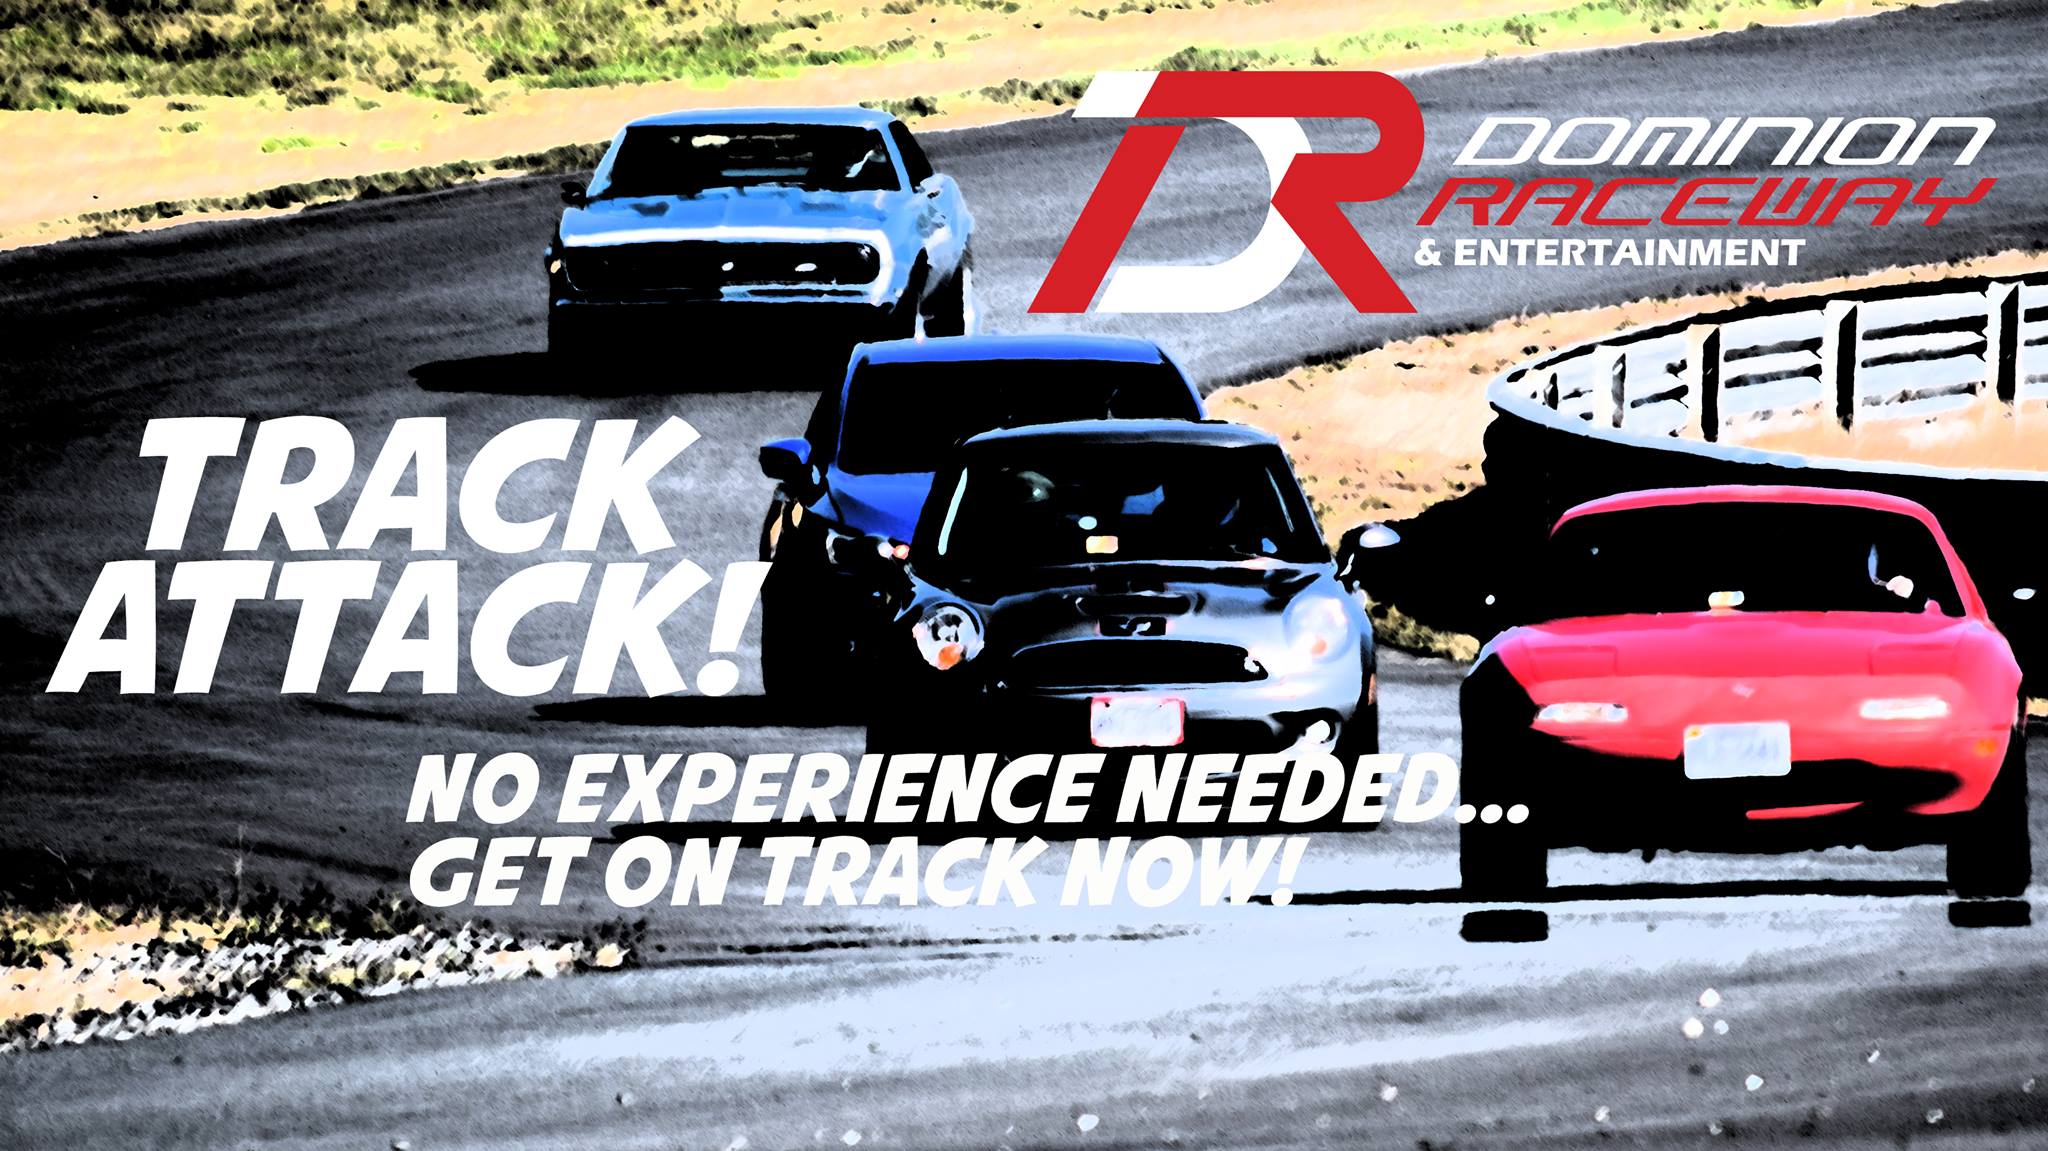 Track Attack 8/17/19. Get On Track Now - No Experience Needed!